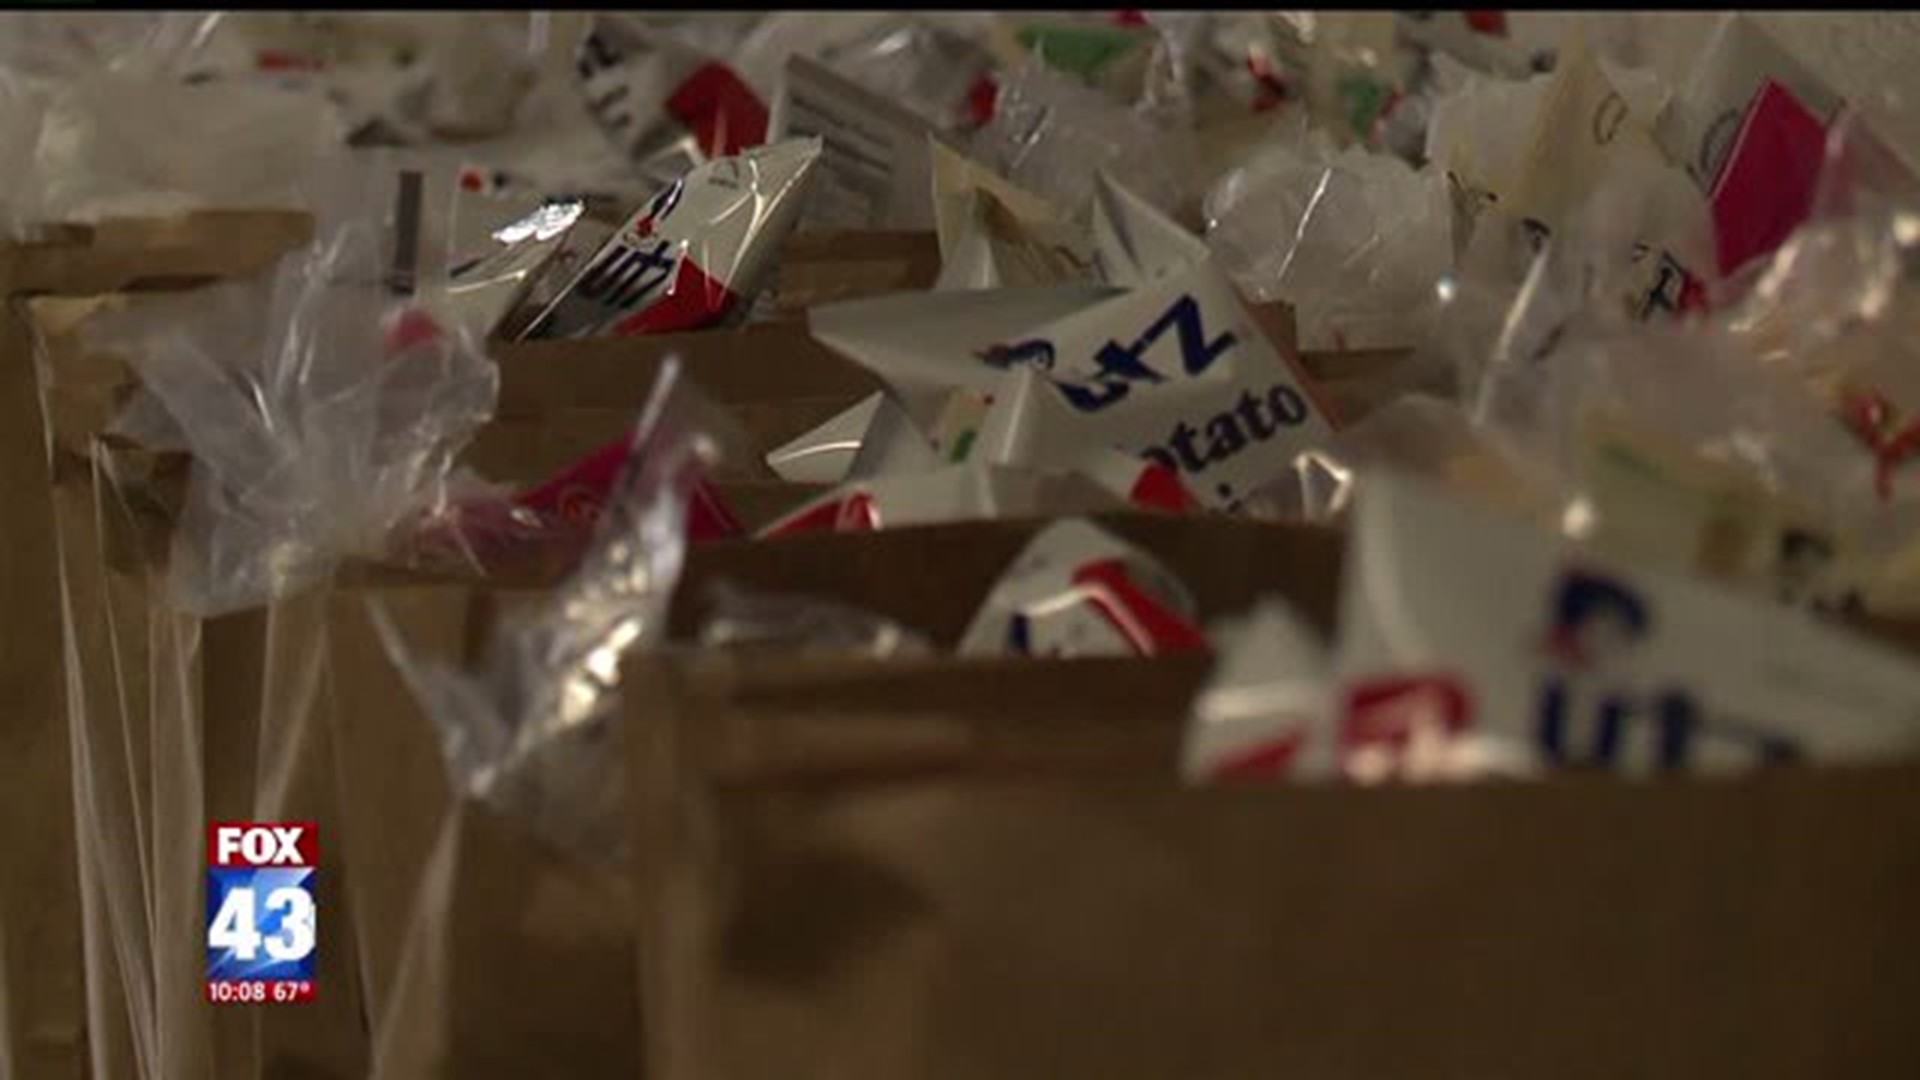 Community Event Helps Feed Those in Need